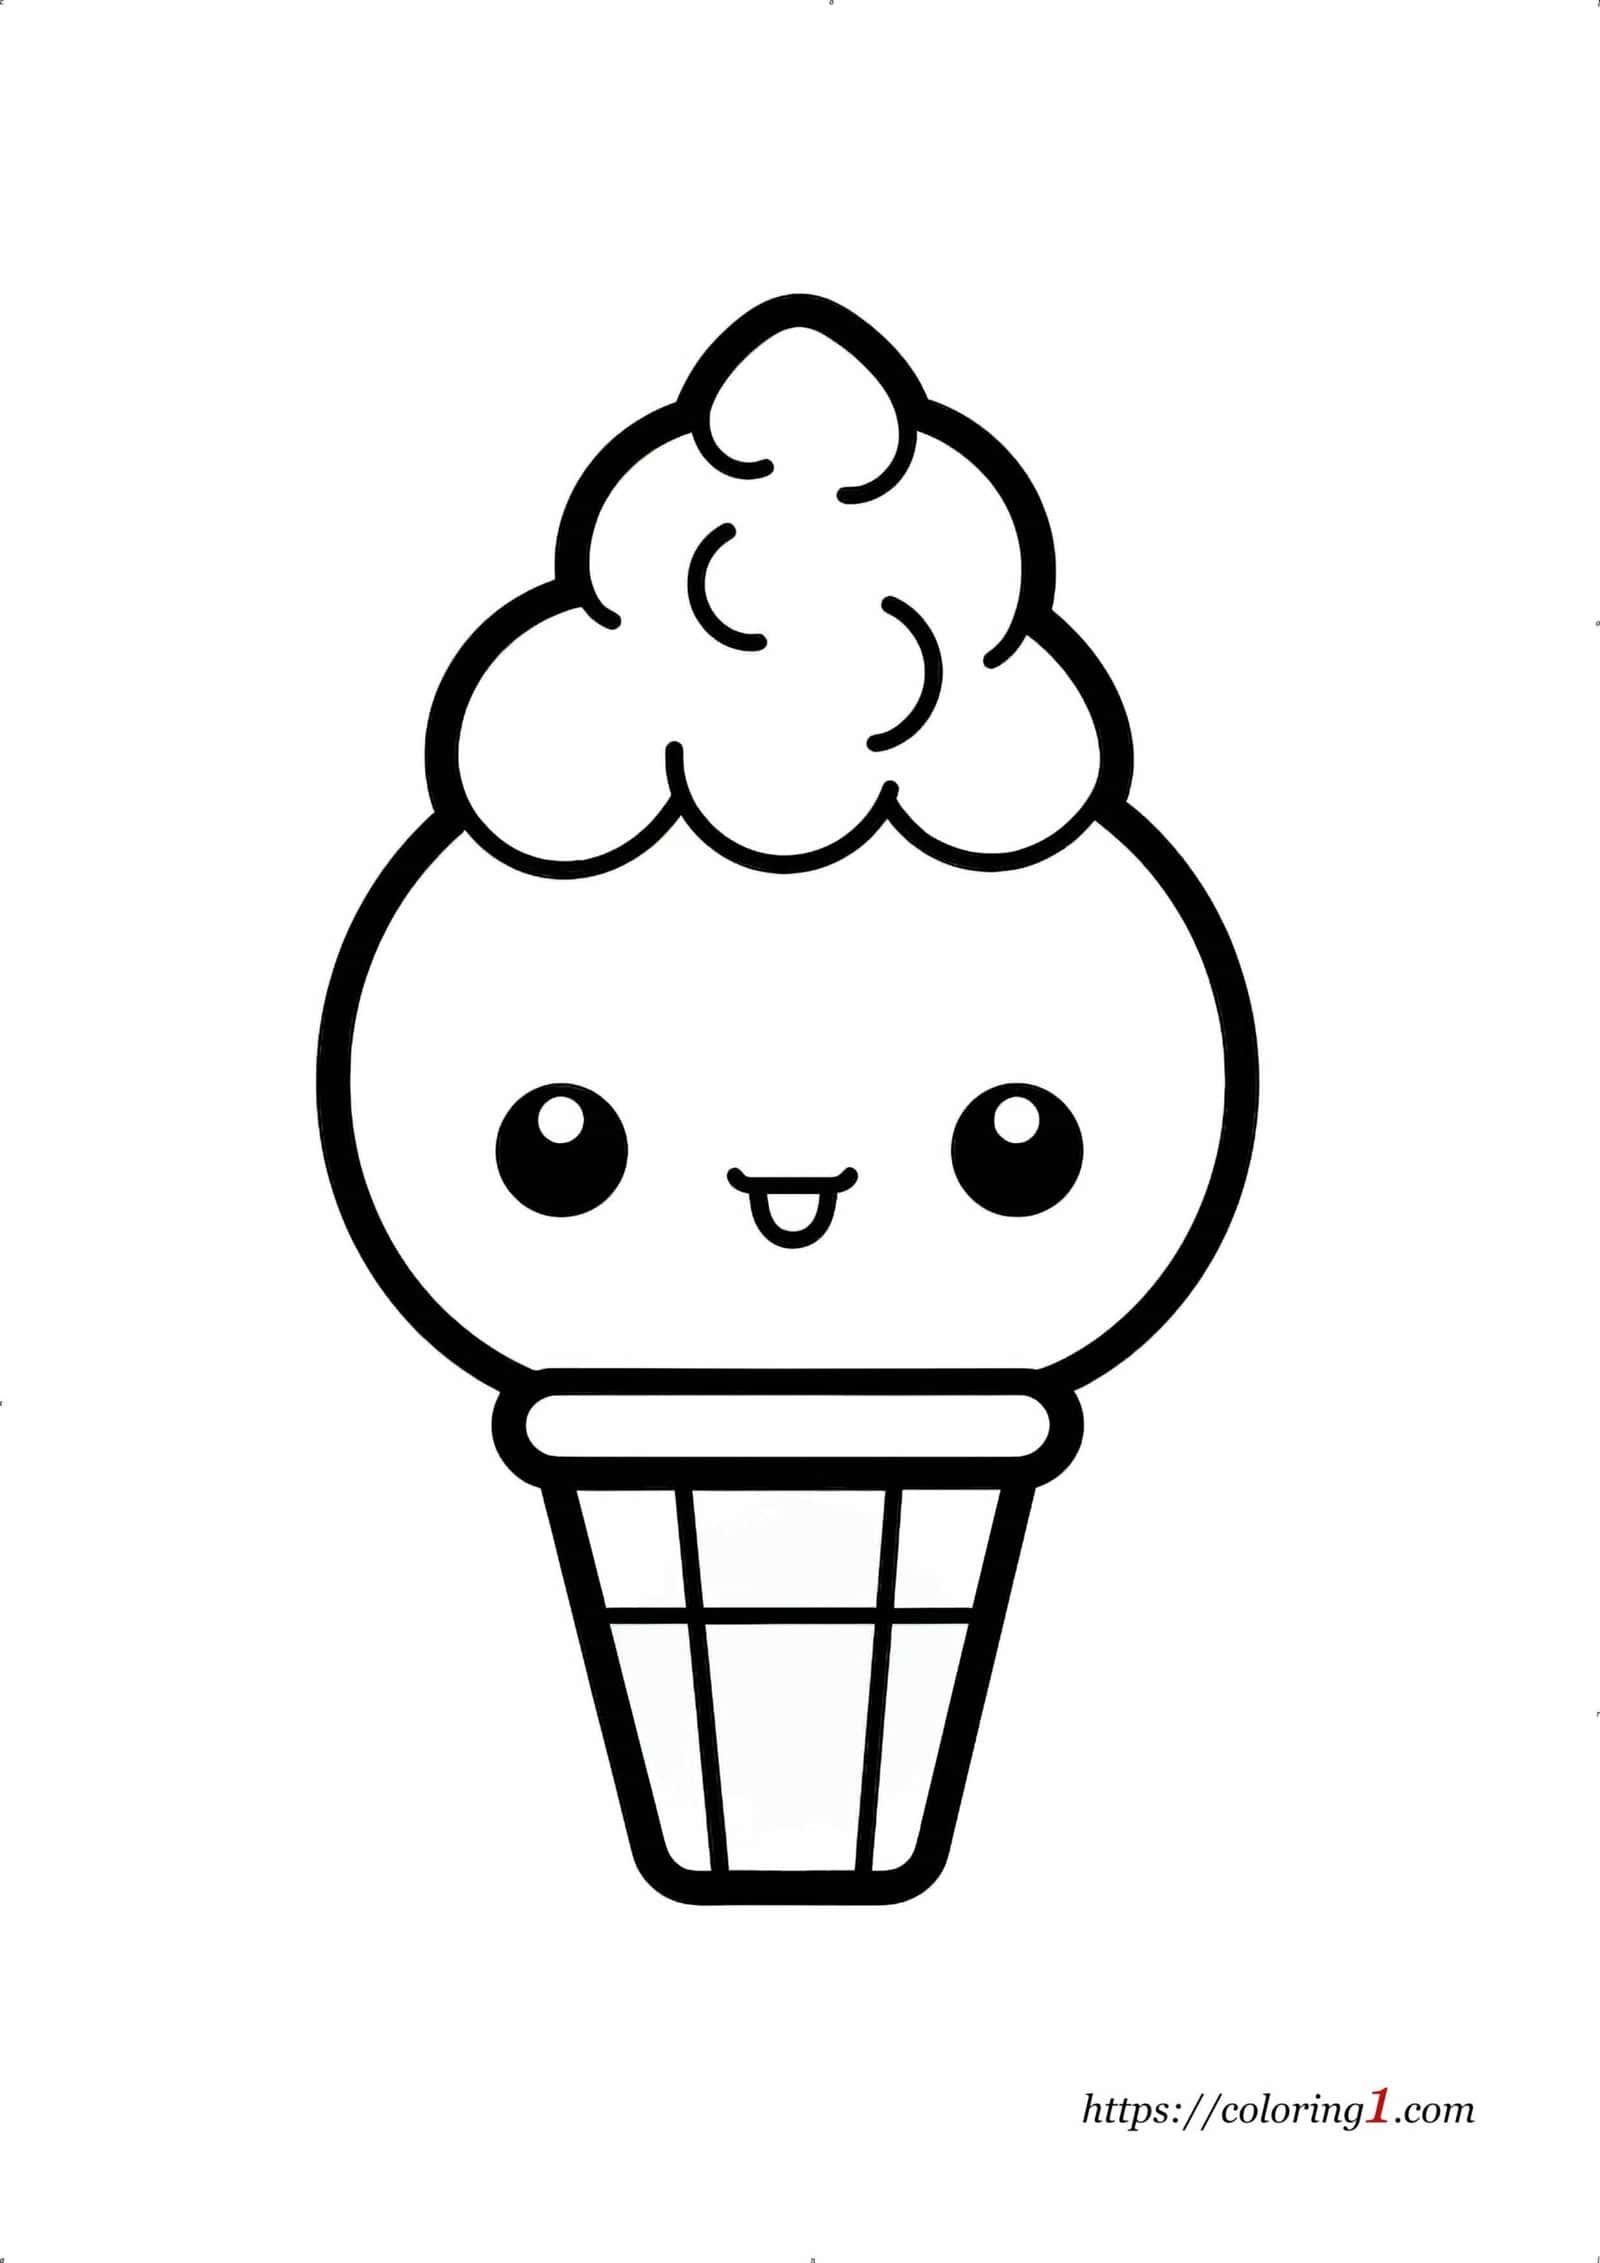 Baby Ice Cream easy coloring page to print